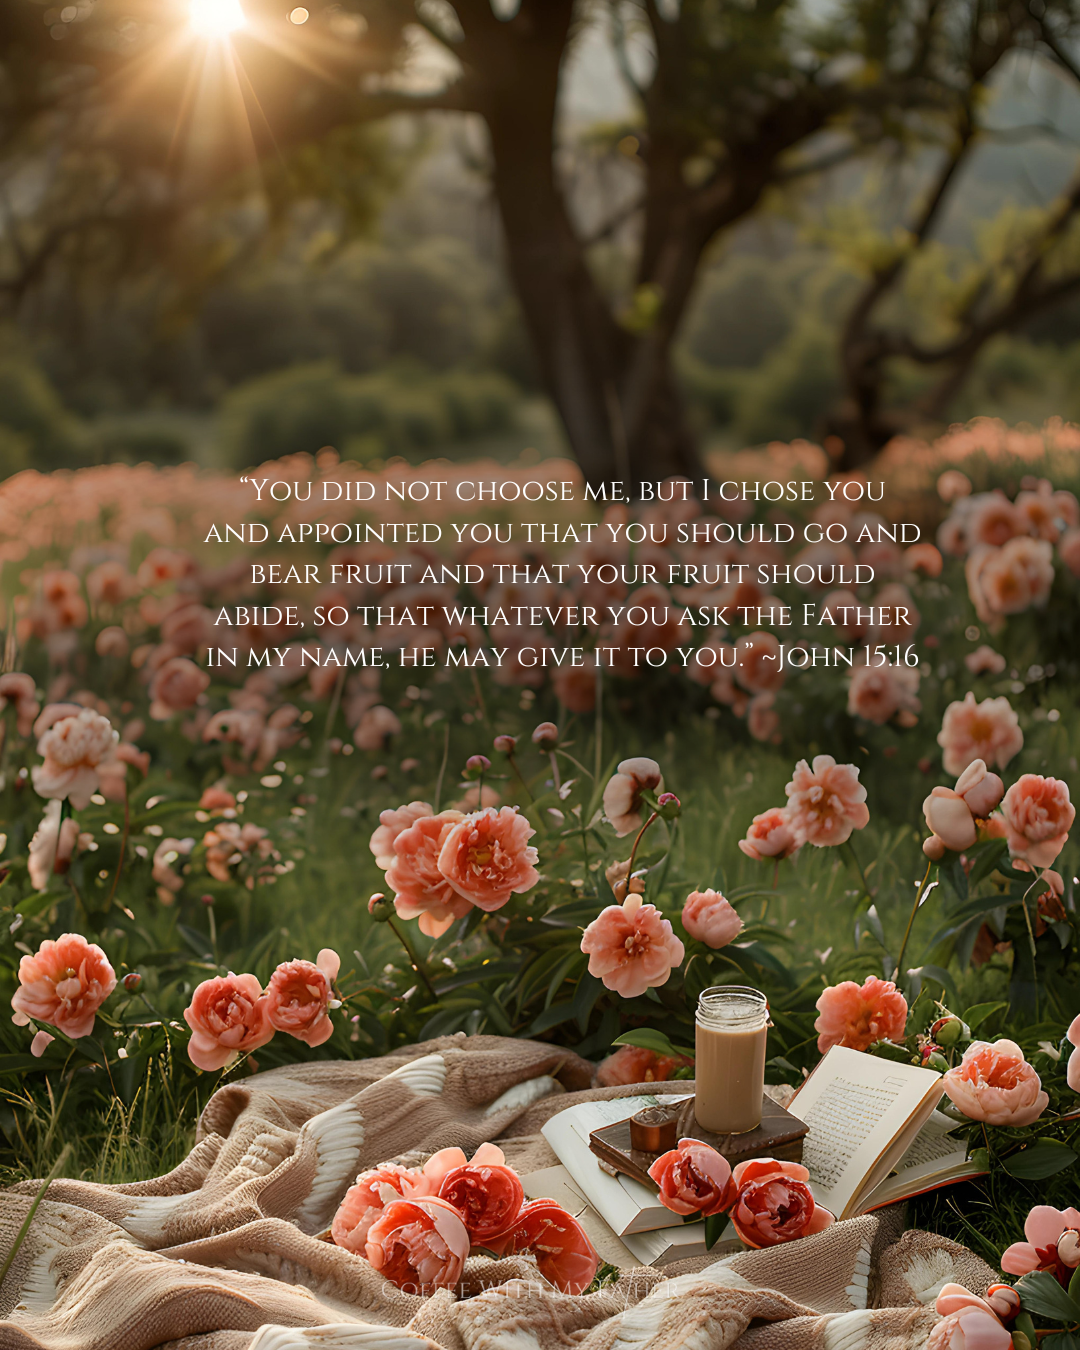 Peaceful outdoor scene with blossoming flowers and a picnic setup, featuring a Bible verse from John 15:16 about divine choice and answered prayers.